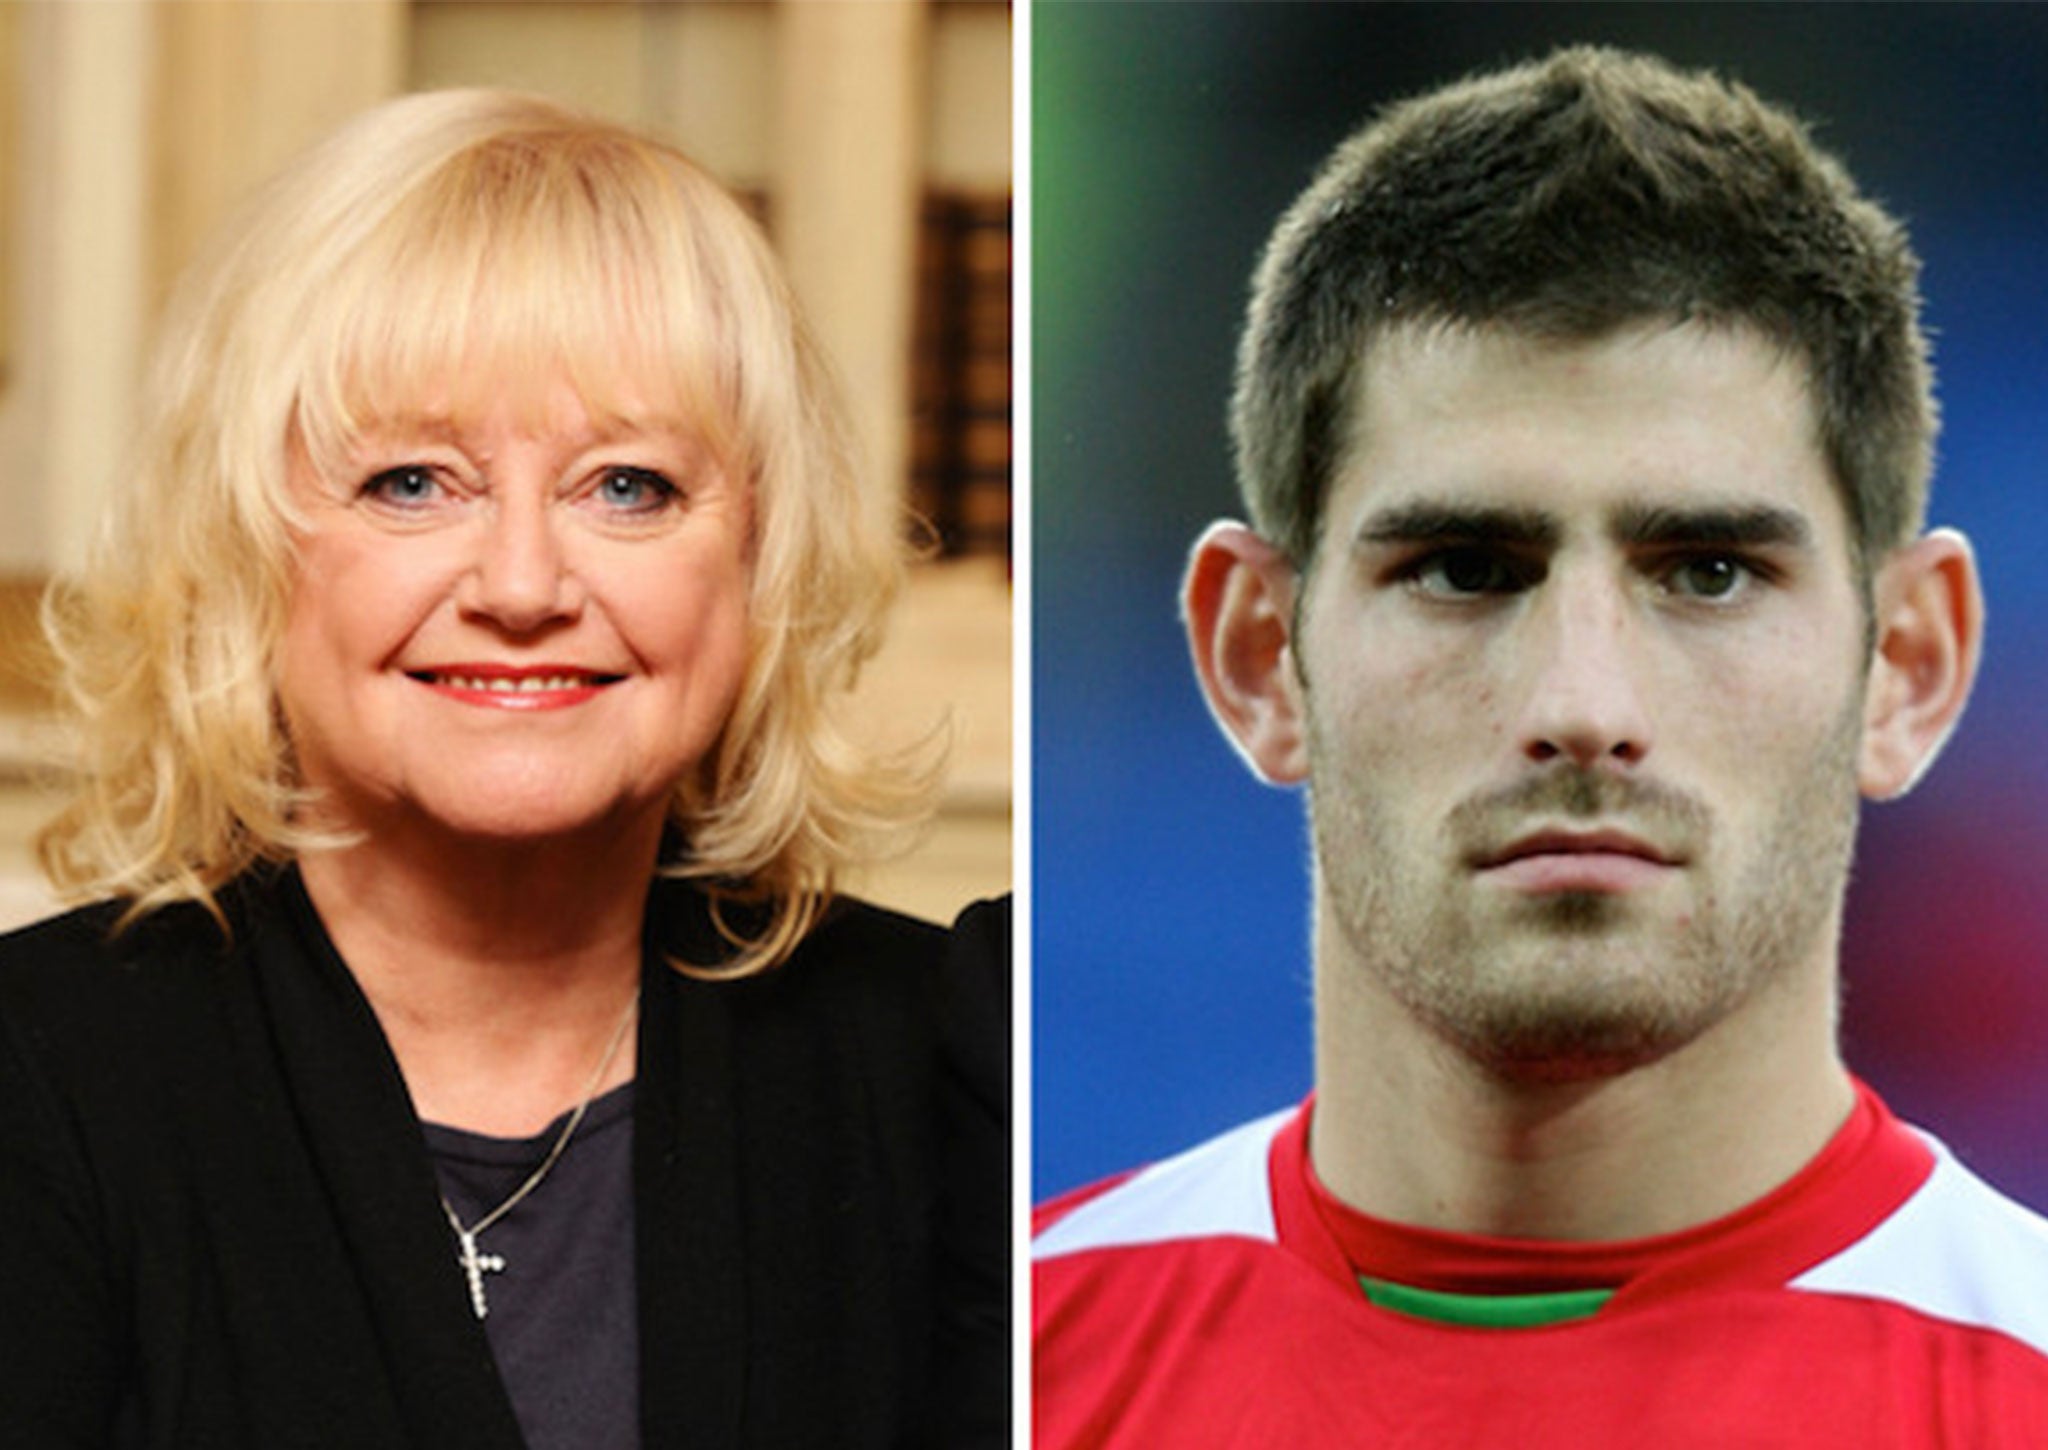 Judy Finnigan has since apologised unreservedly for her comments about the convicted rapist Ched Evans, saying they were “badly worded”.